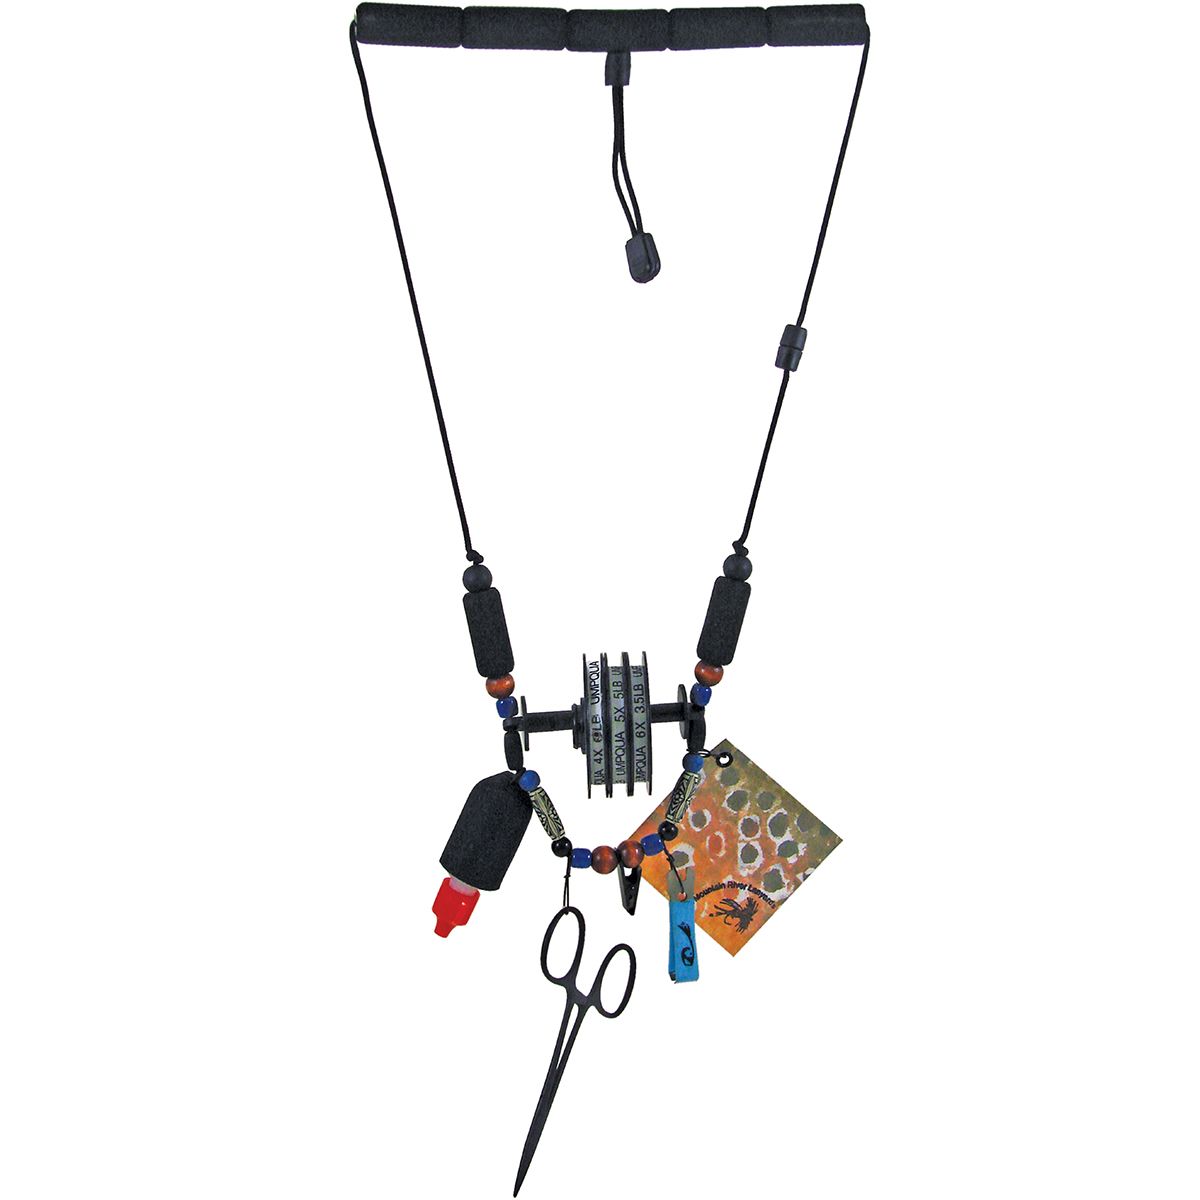 Angler's Accessories Mountain River Guide Lanyard - Fishing